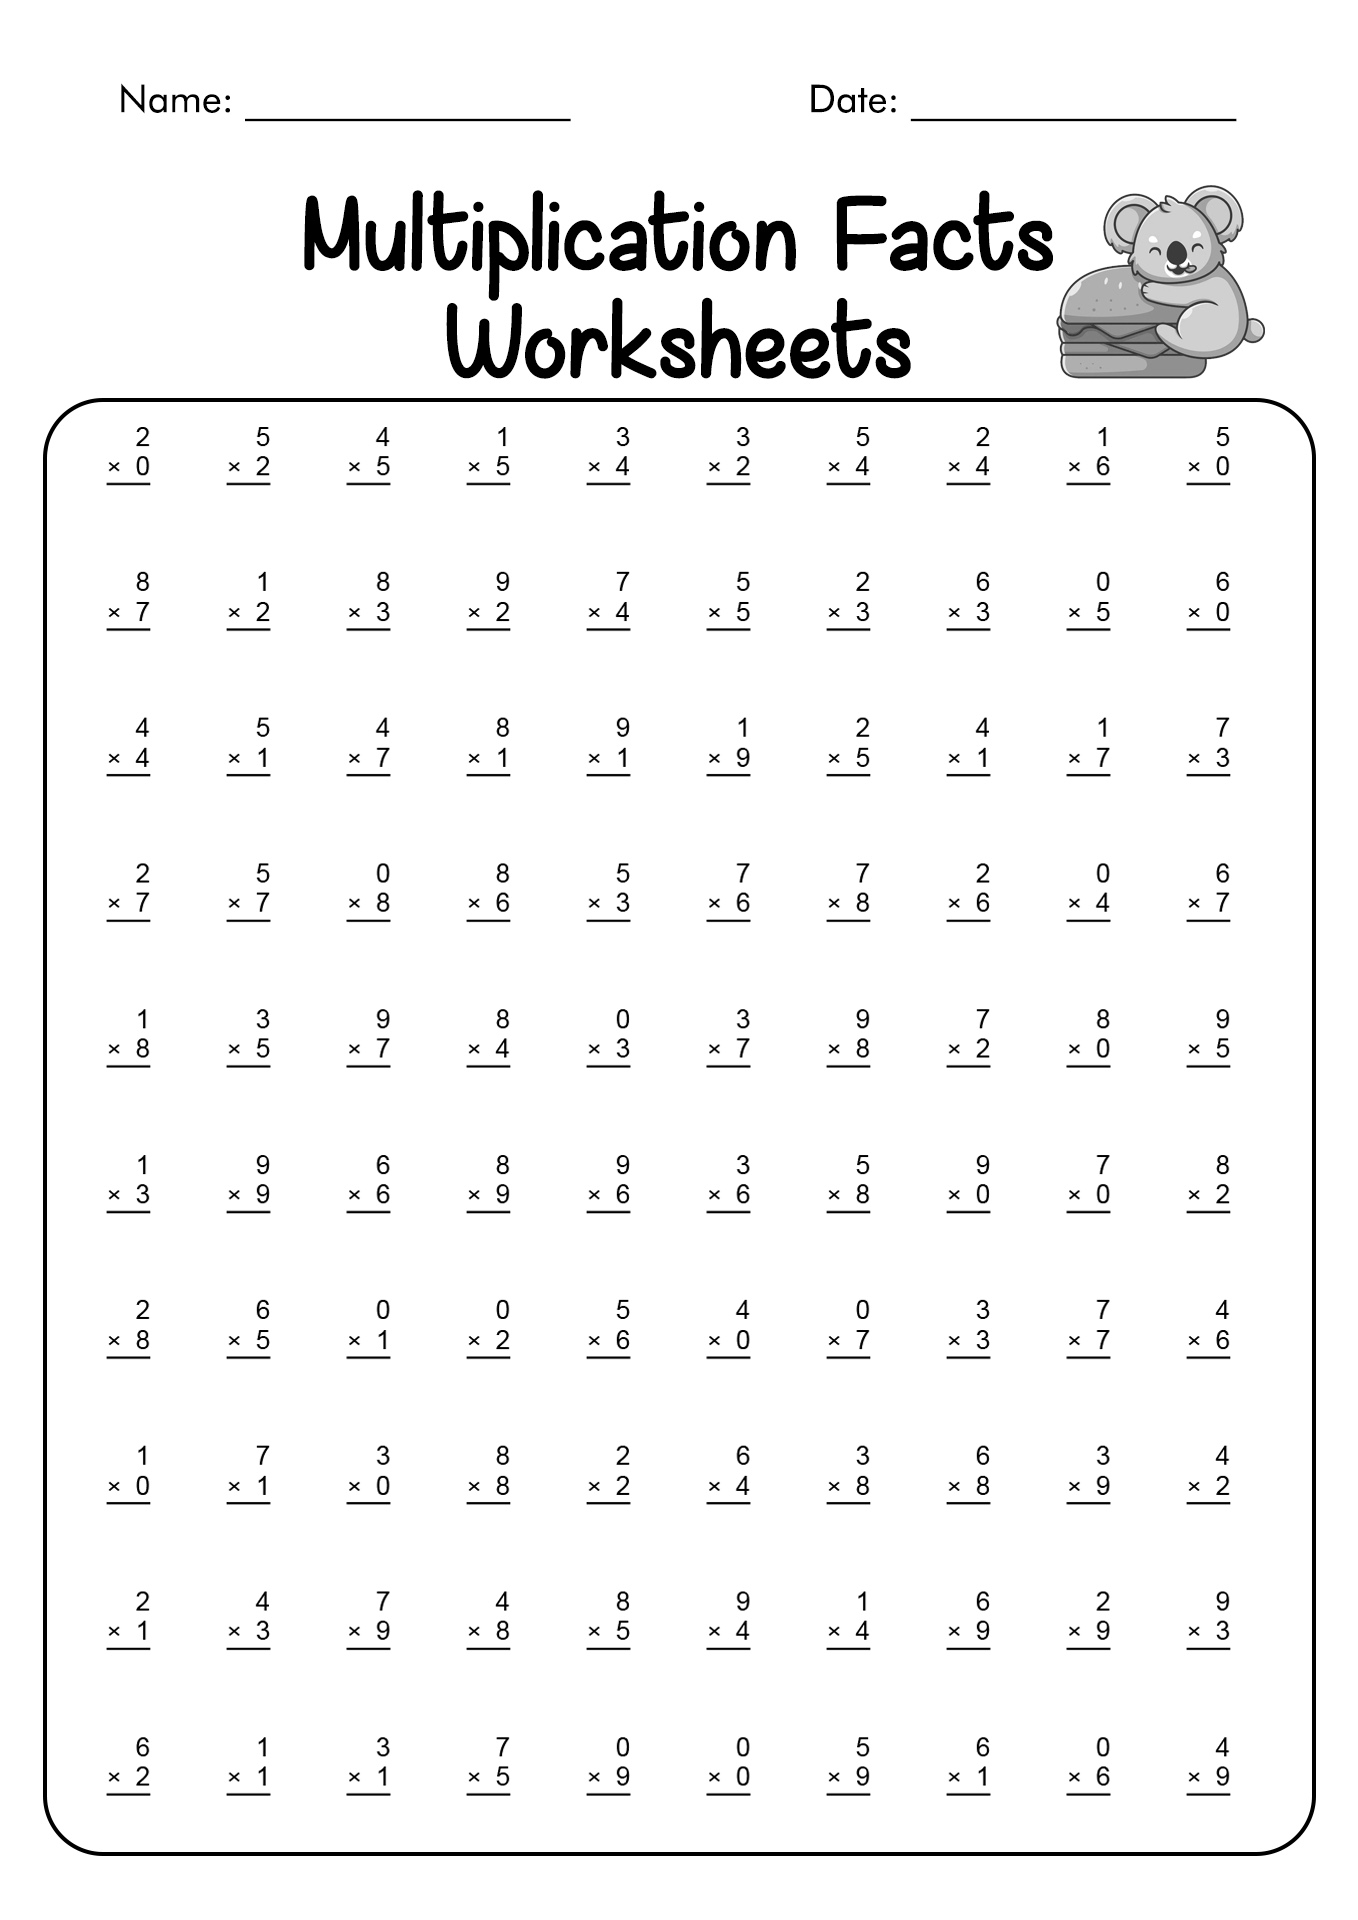 13-best-images-of-printable-multiplication-worksheets-5s-multiplication-facts-by-5-worksheets